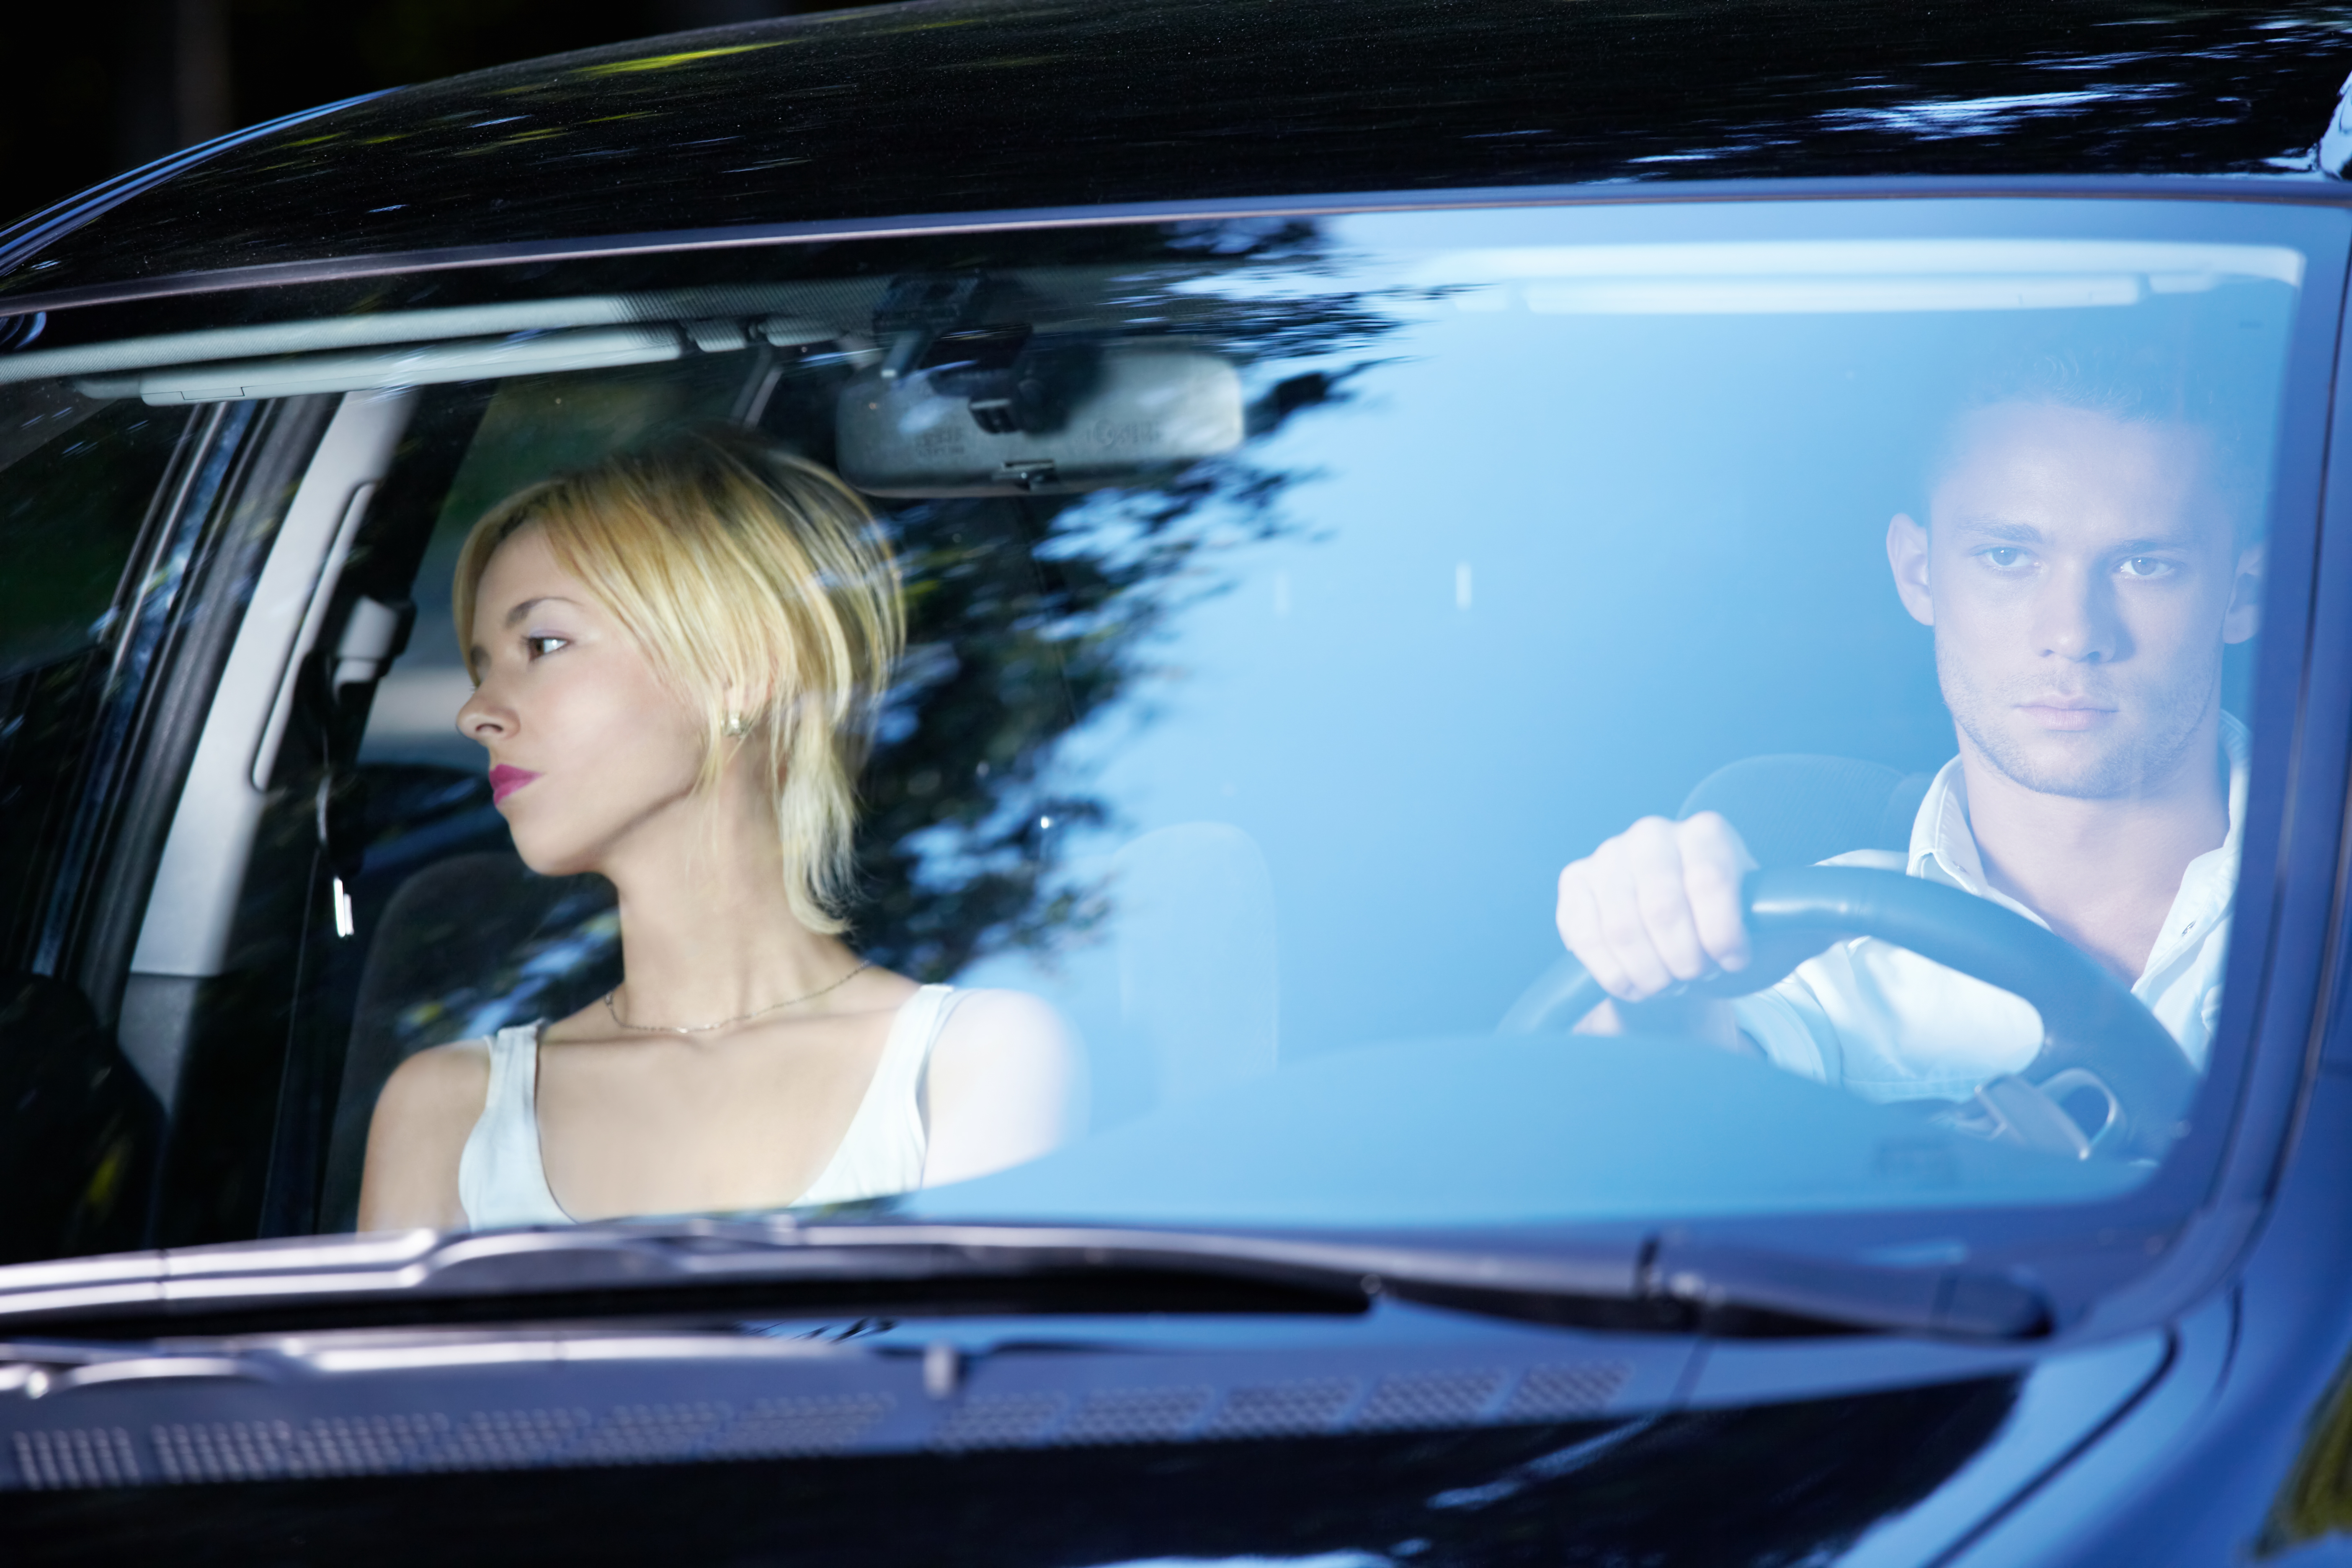 An upset couple driving together | Source: Getty Images